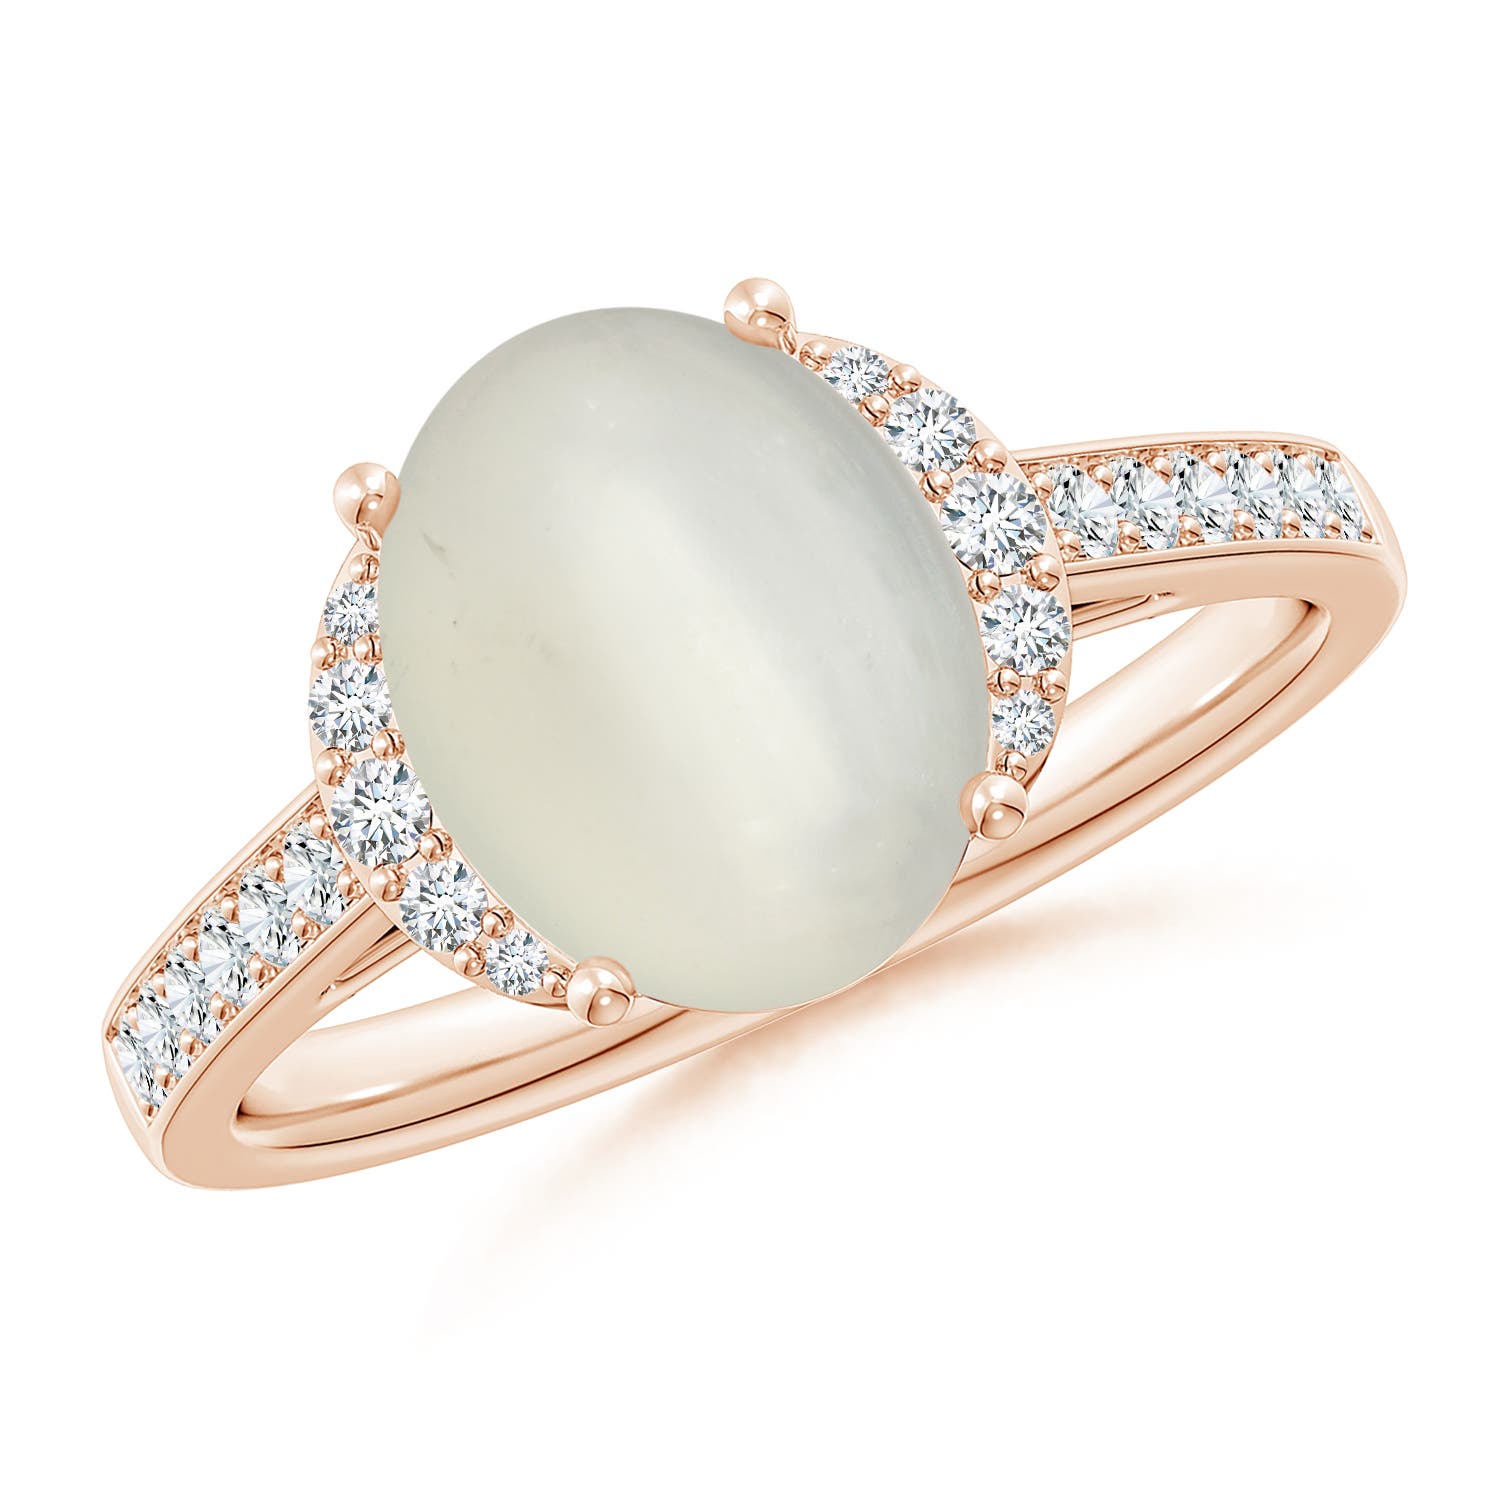 AAA - Moonstone / 2.75 CT / 14 KT Rose Gold